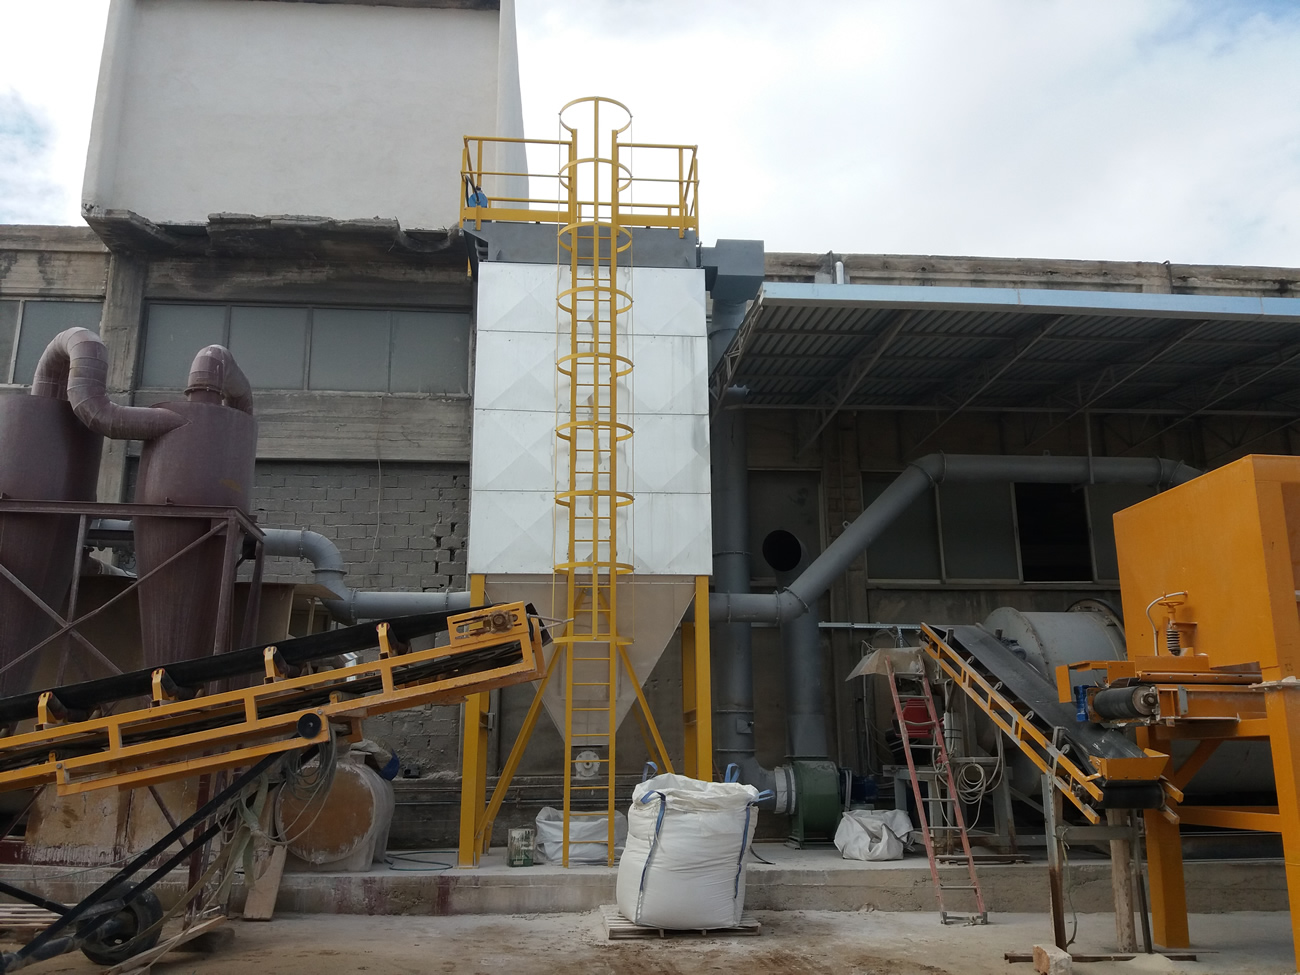 Dedusting filter with external insulation and heating elements for dedusting a raw material dryer